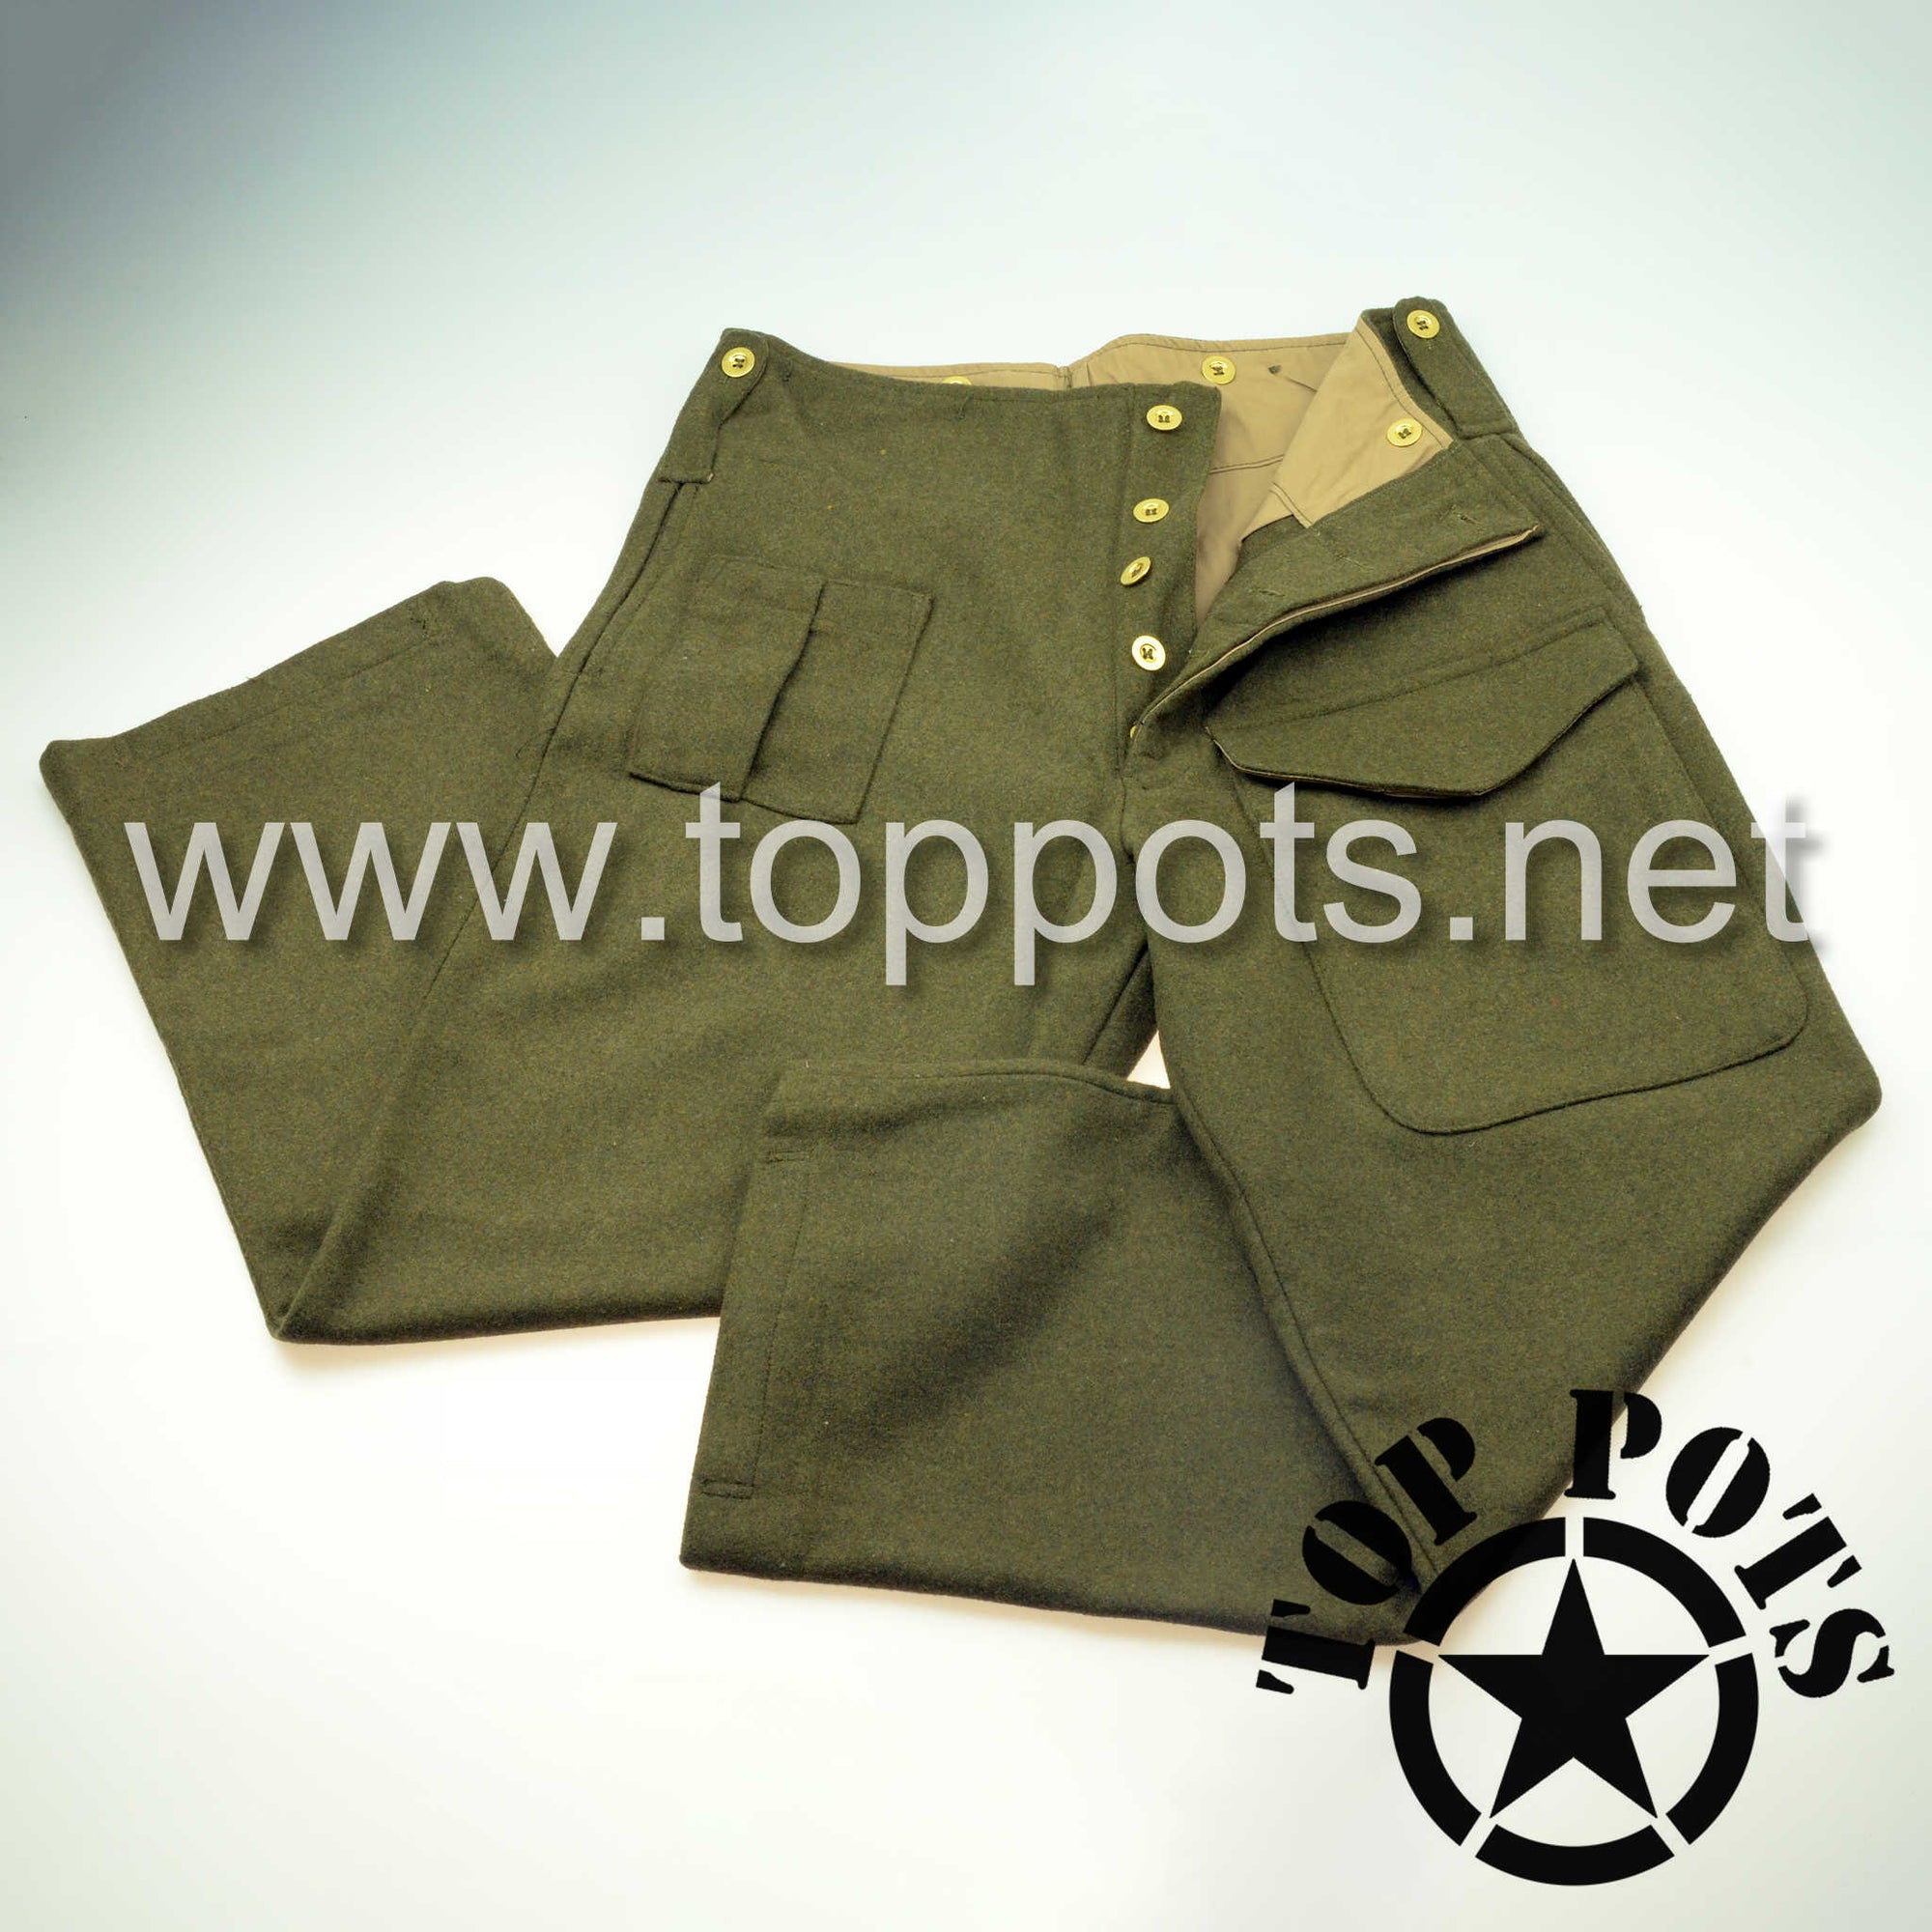 WWII Canadian Army Reproduction M1937 P37 Wool Enlisted Battledress Trouser Pants – Khaki Green Wool